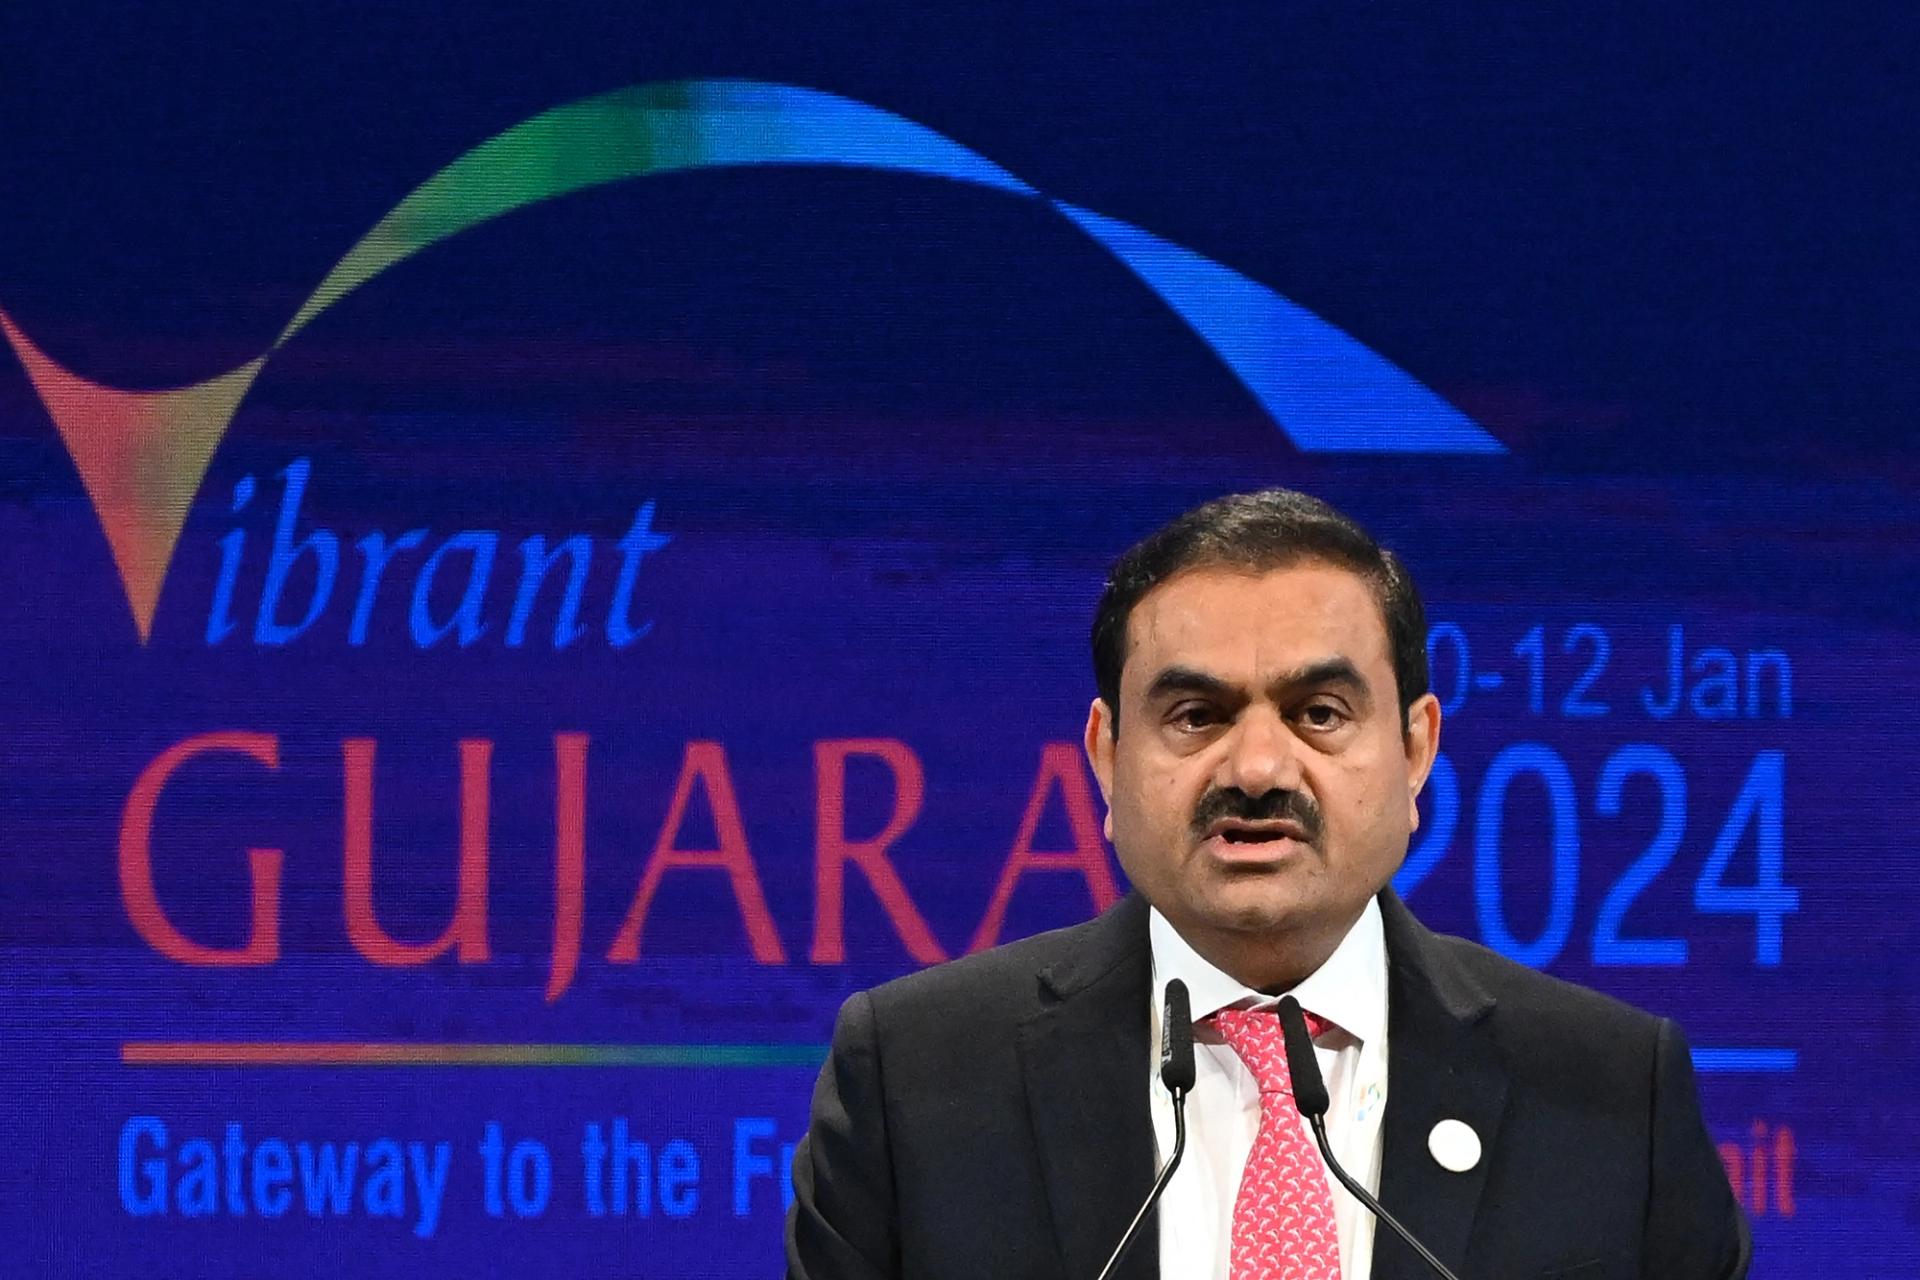 India's Adani Group implicated in coal scam as scrutiny on founder's political ties grows | Semafor